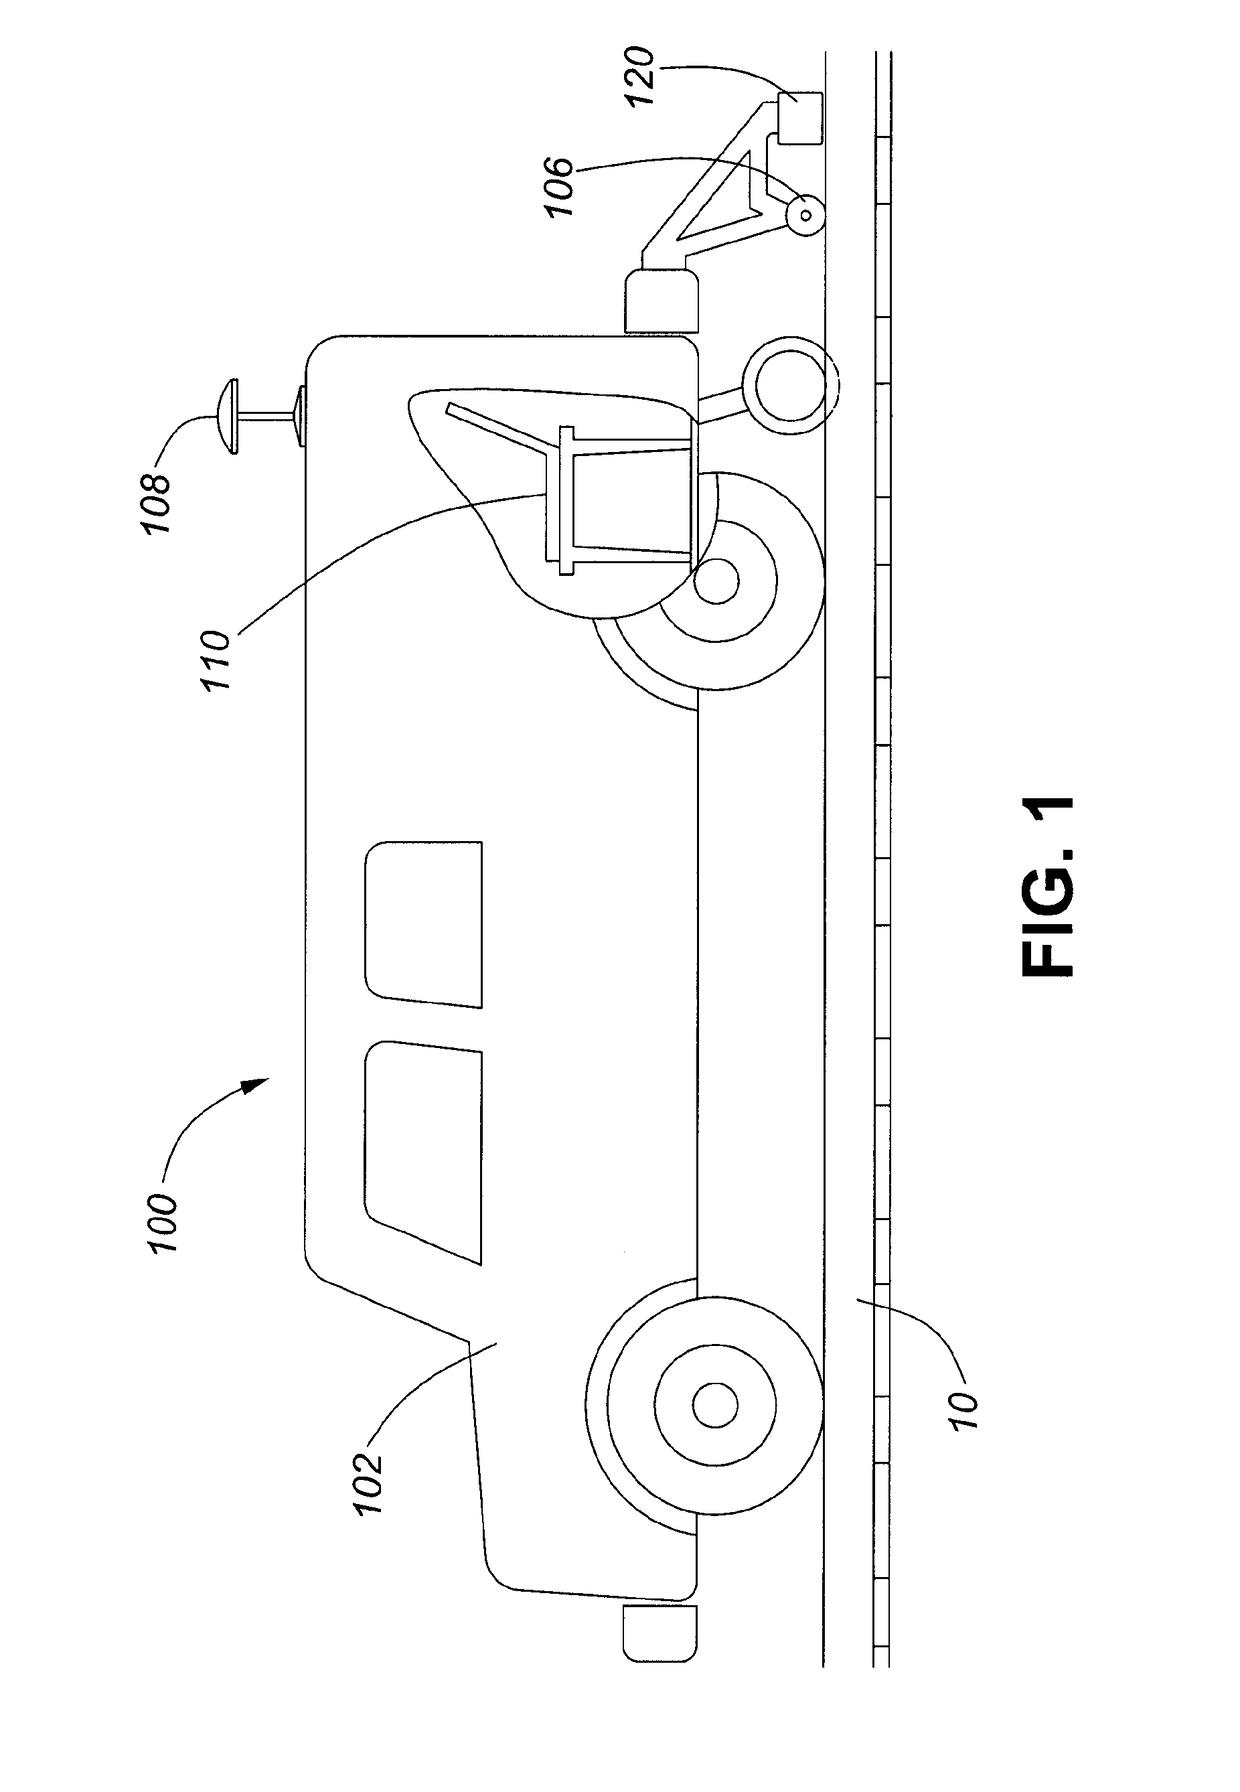 Method and system for non-destructive rail inspection